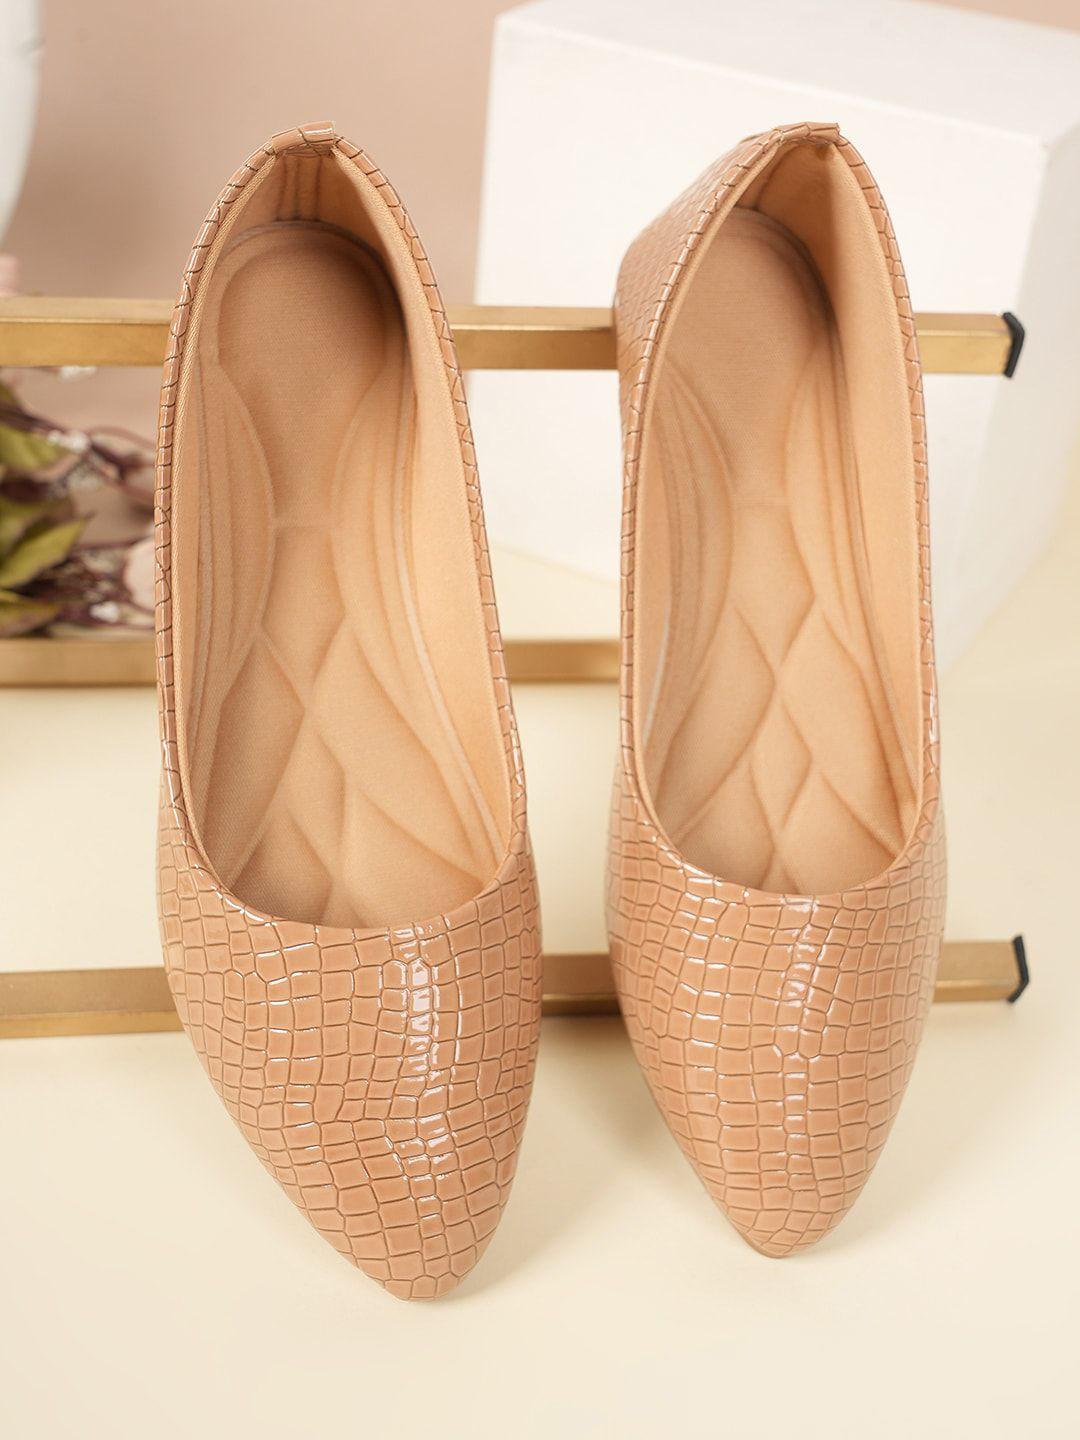 style shoes textured pointed toe ballerinas